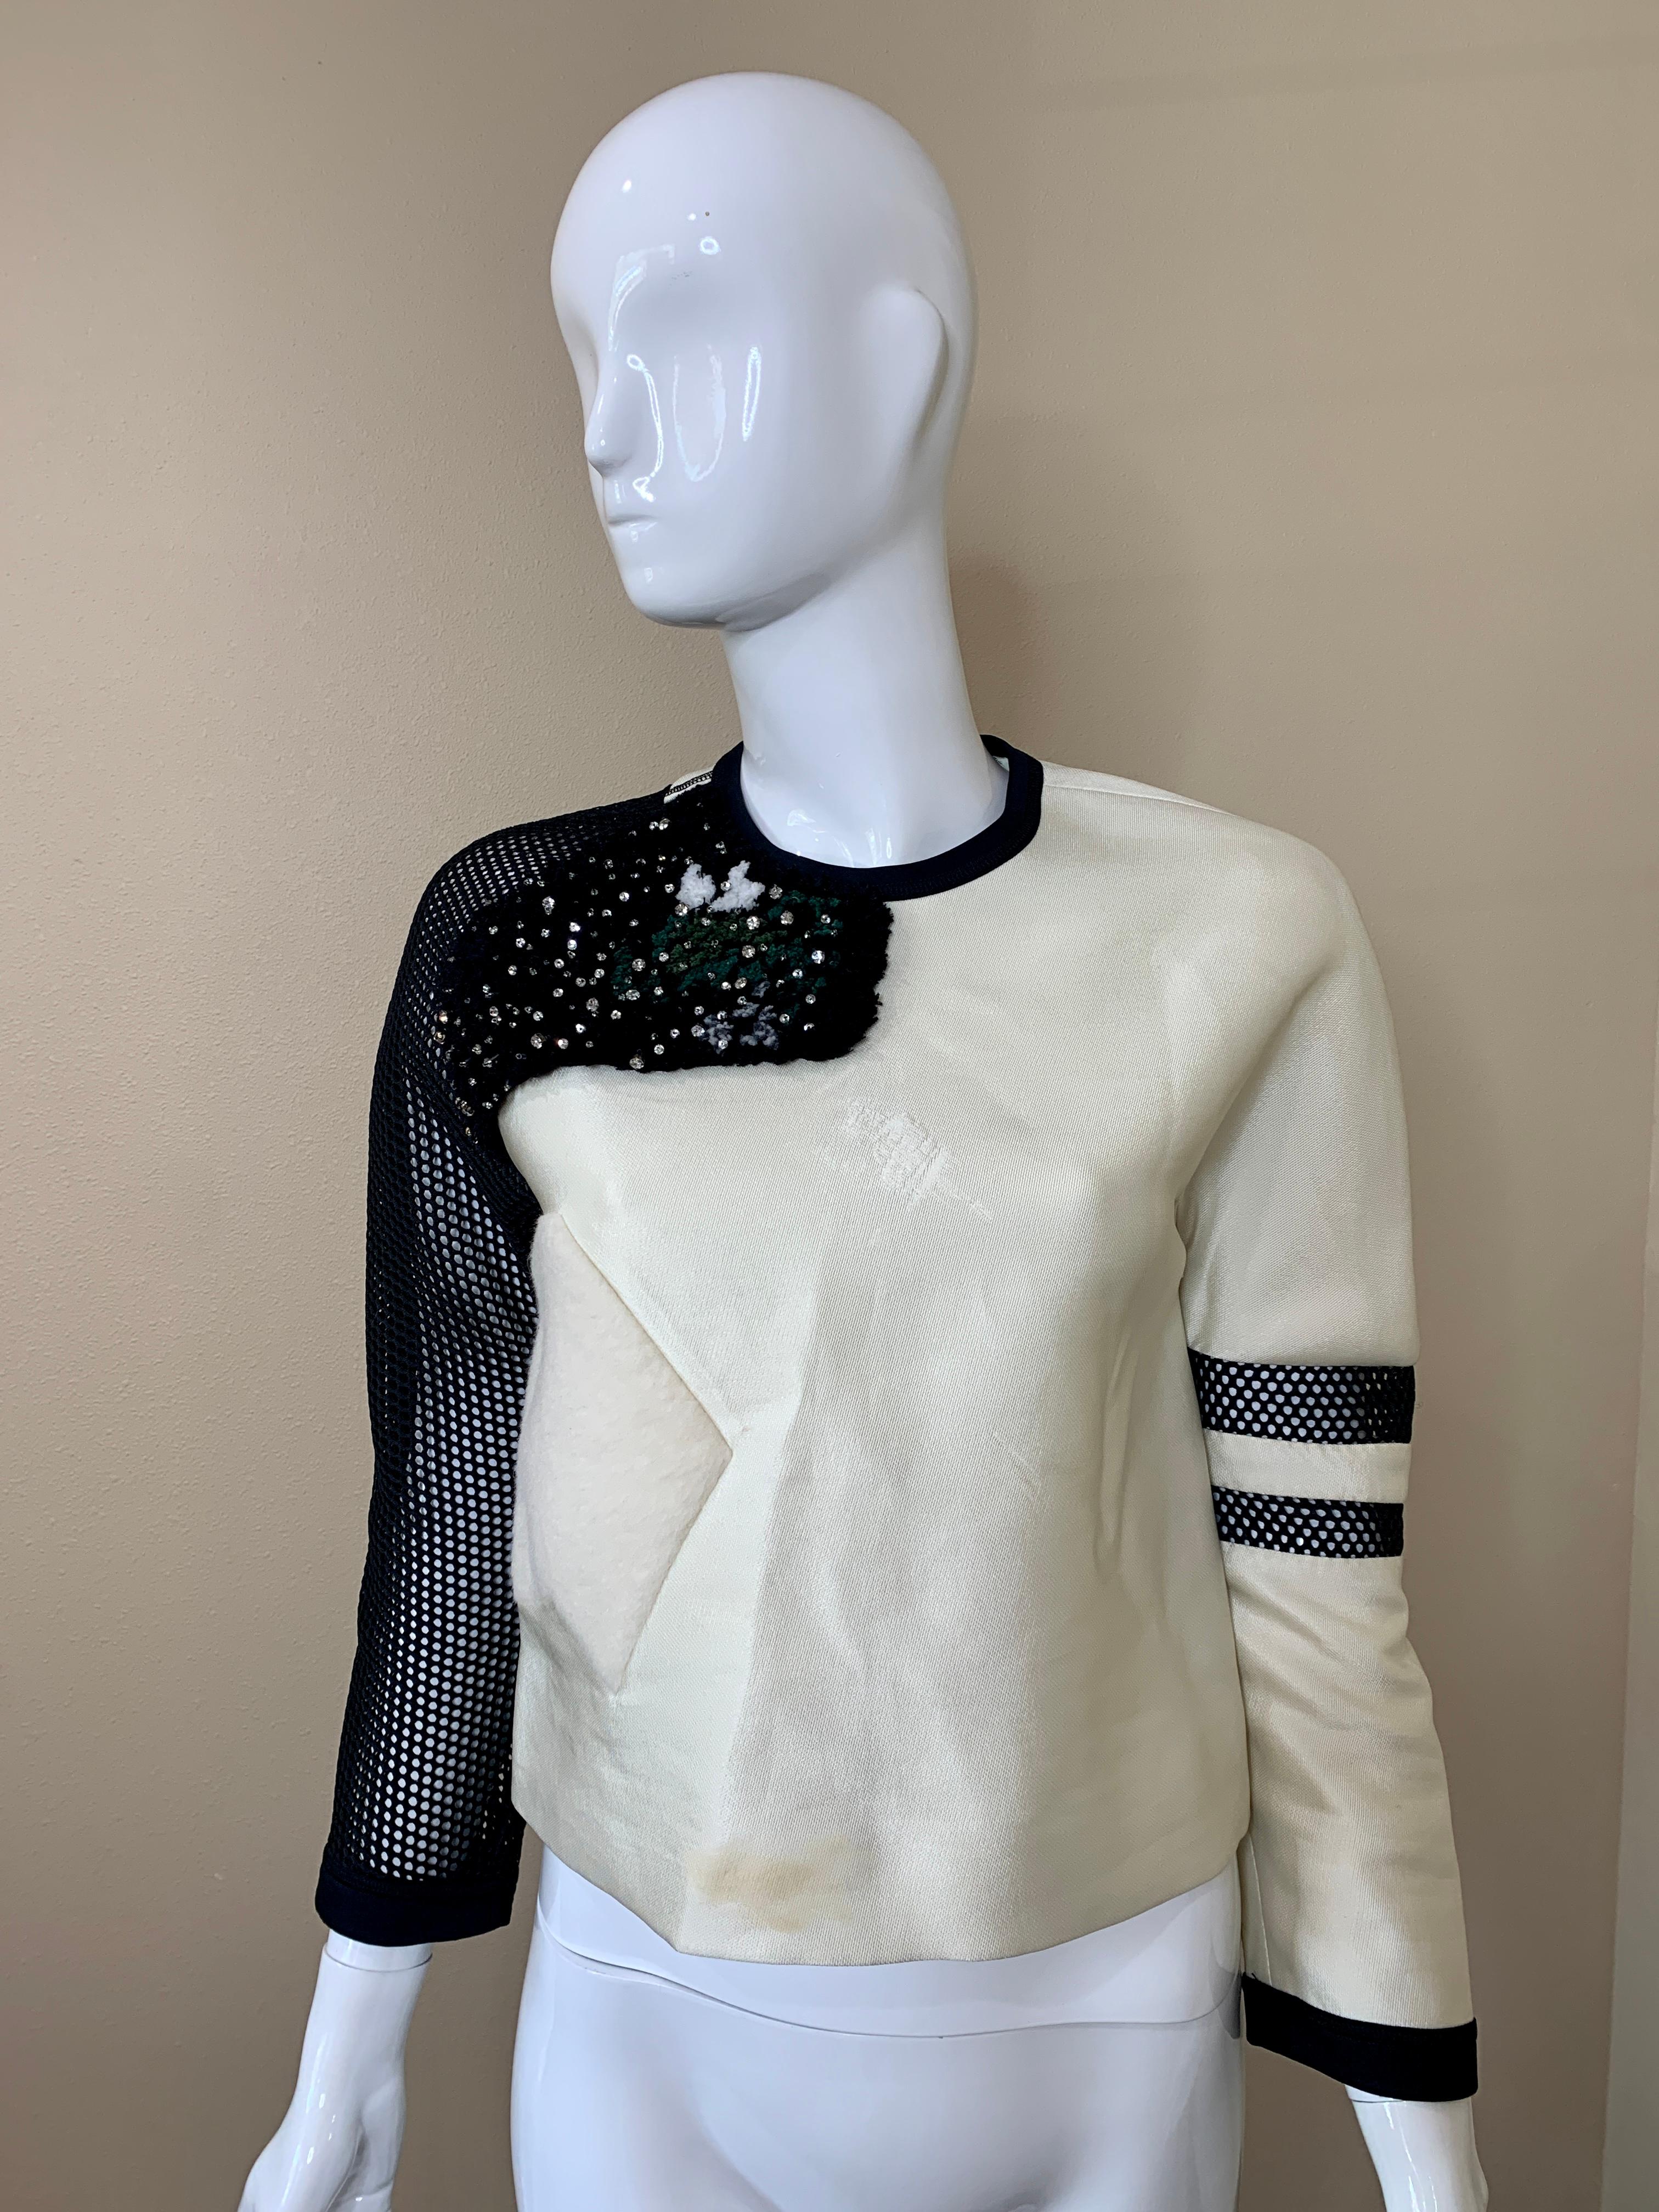 Very Unique and beutiful Fendi Sweater. It is a mixture of colors and textures - cream, black and turquoise with different textures throughout the piece. 

Zipper closure in back for easy pull-on wear. Size 36 with not a lot of give because of the